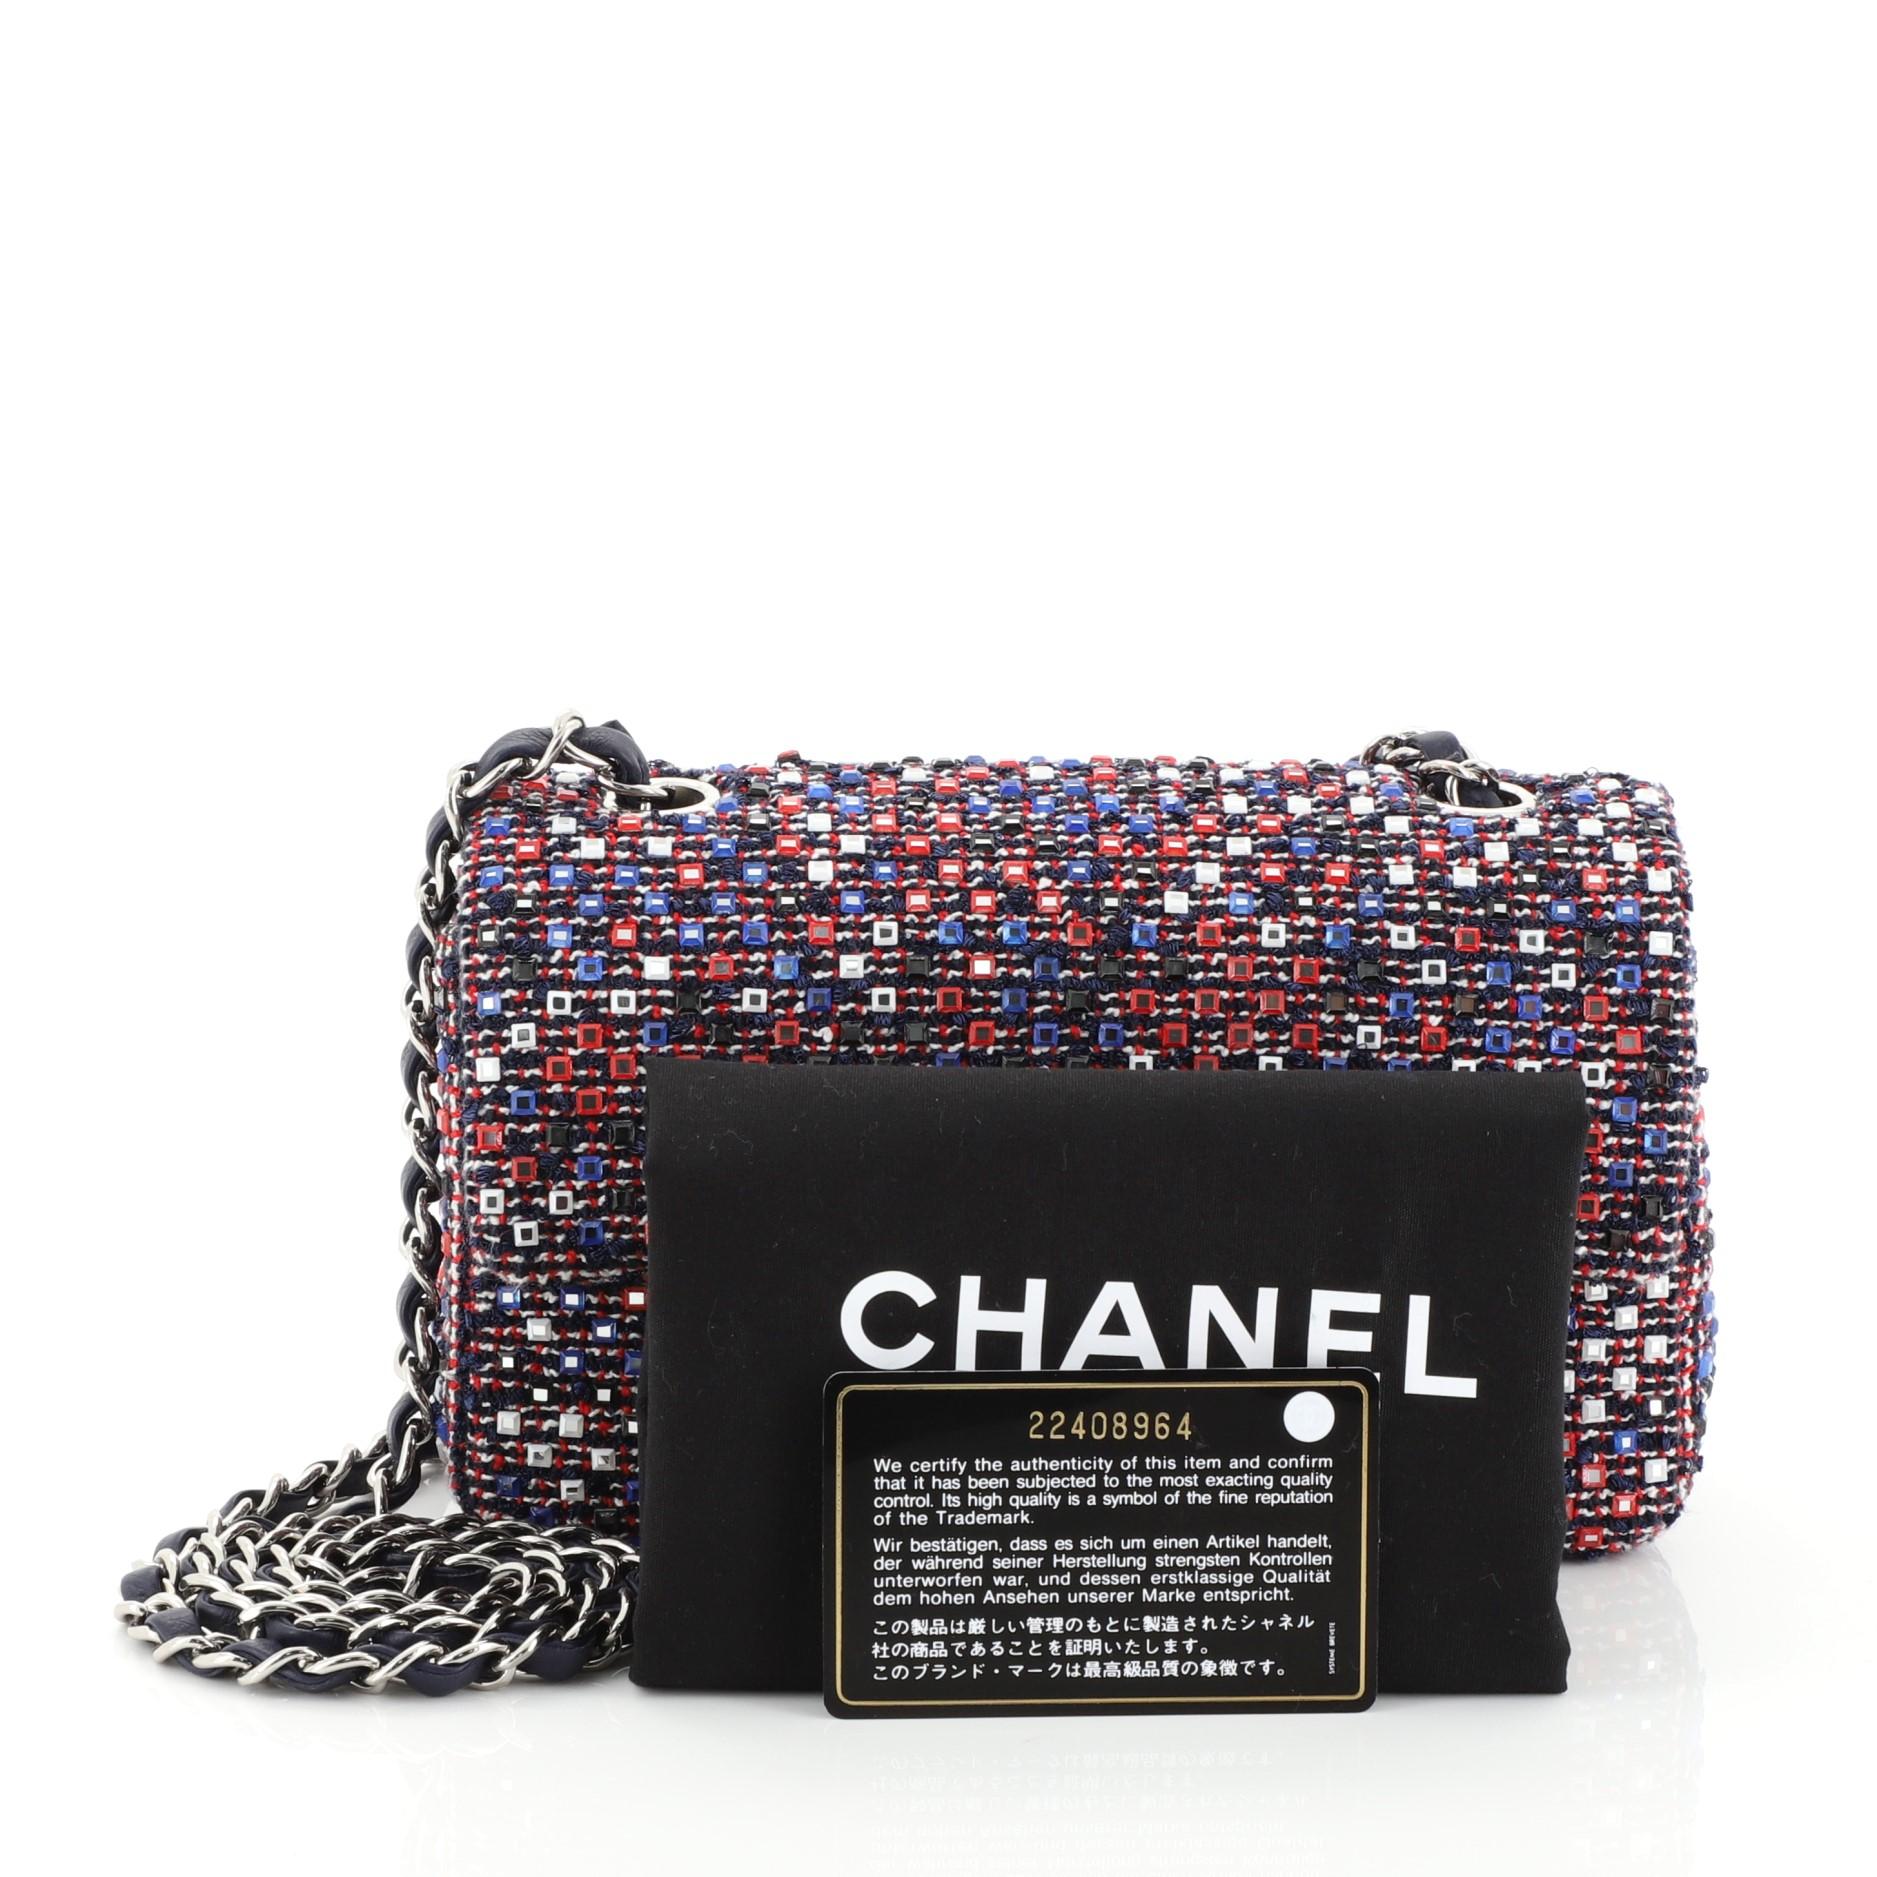 This Chanel CC Flap Bag Embellished Tweed Medium, crafted in multicolored tweed, features a woven in leather chain link strap and silver-tone hardware. Its CC turn-lock and zip closure opens to a blue leather interior. Hologram sticker reads: